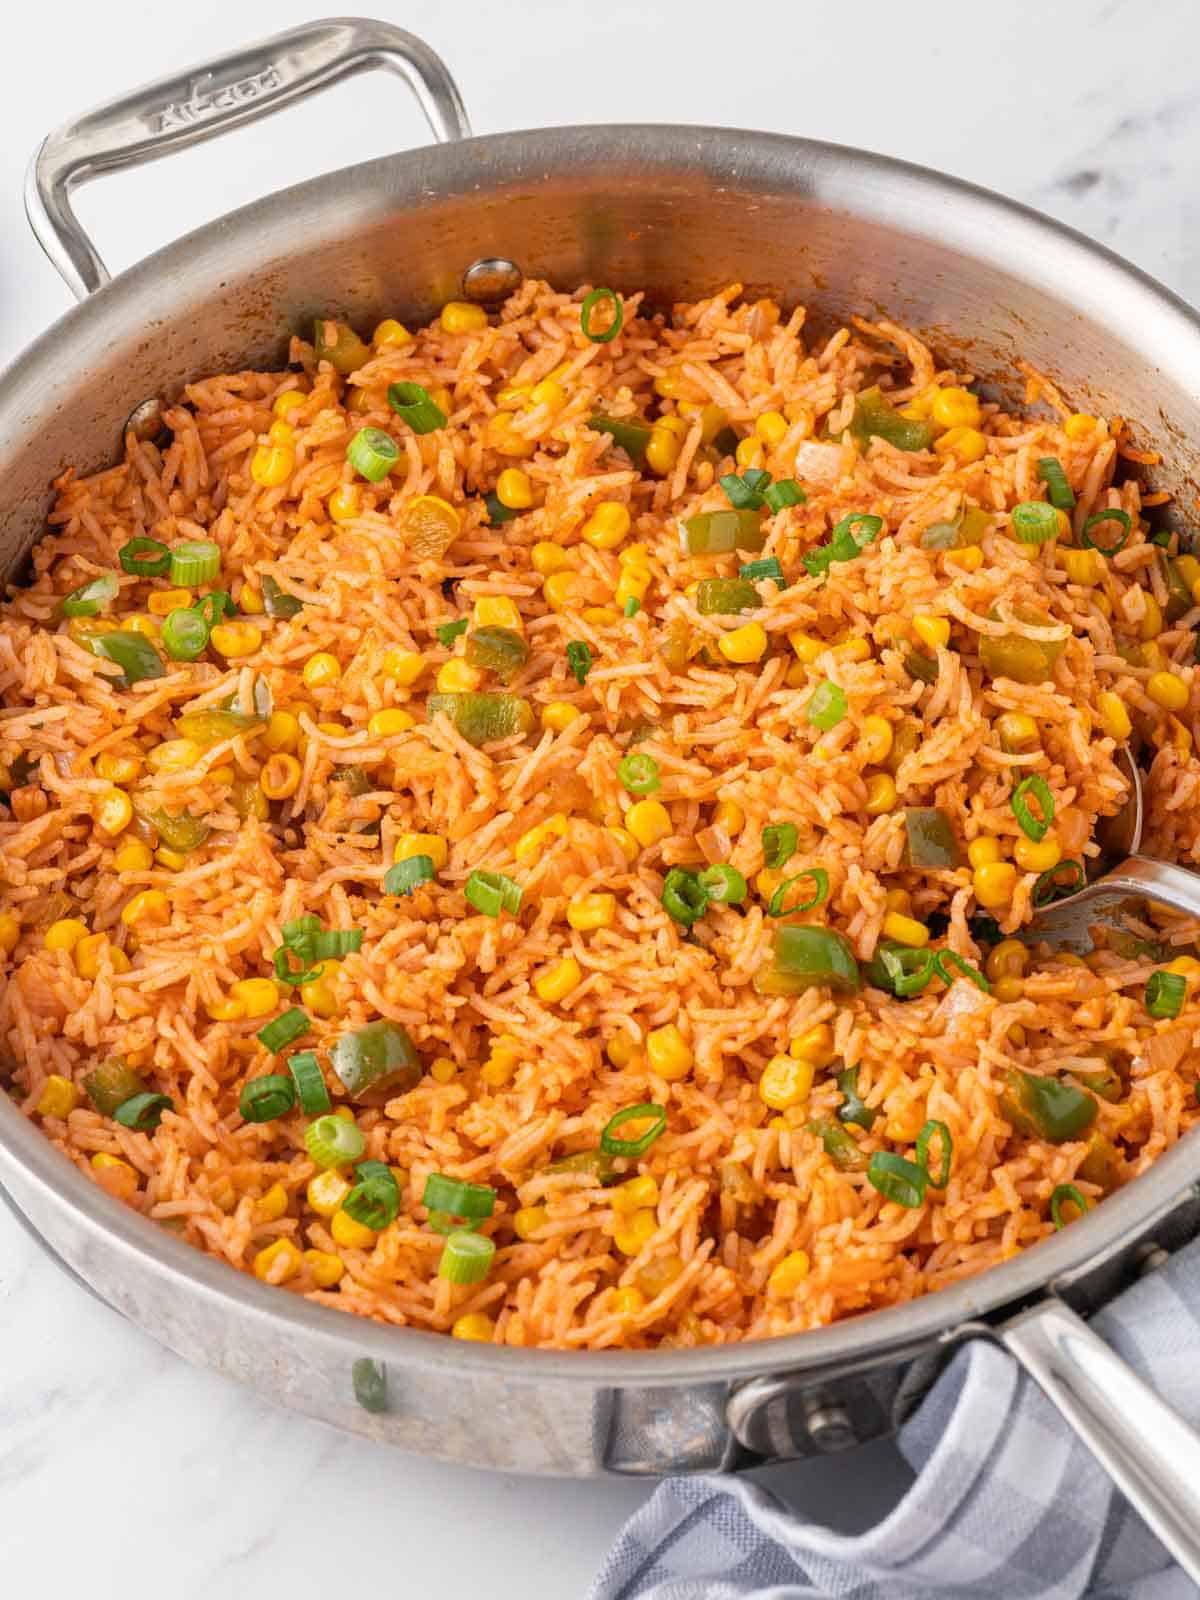 A spoon scoops fried mexican rice from a skillet.